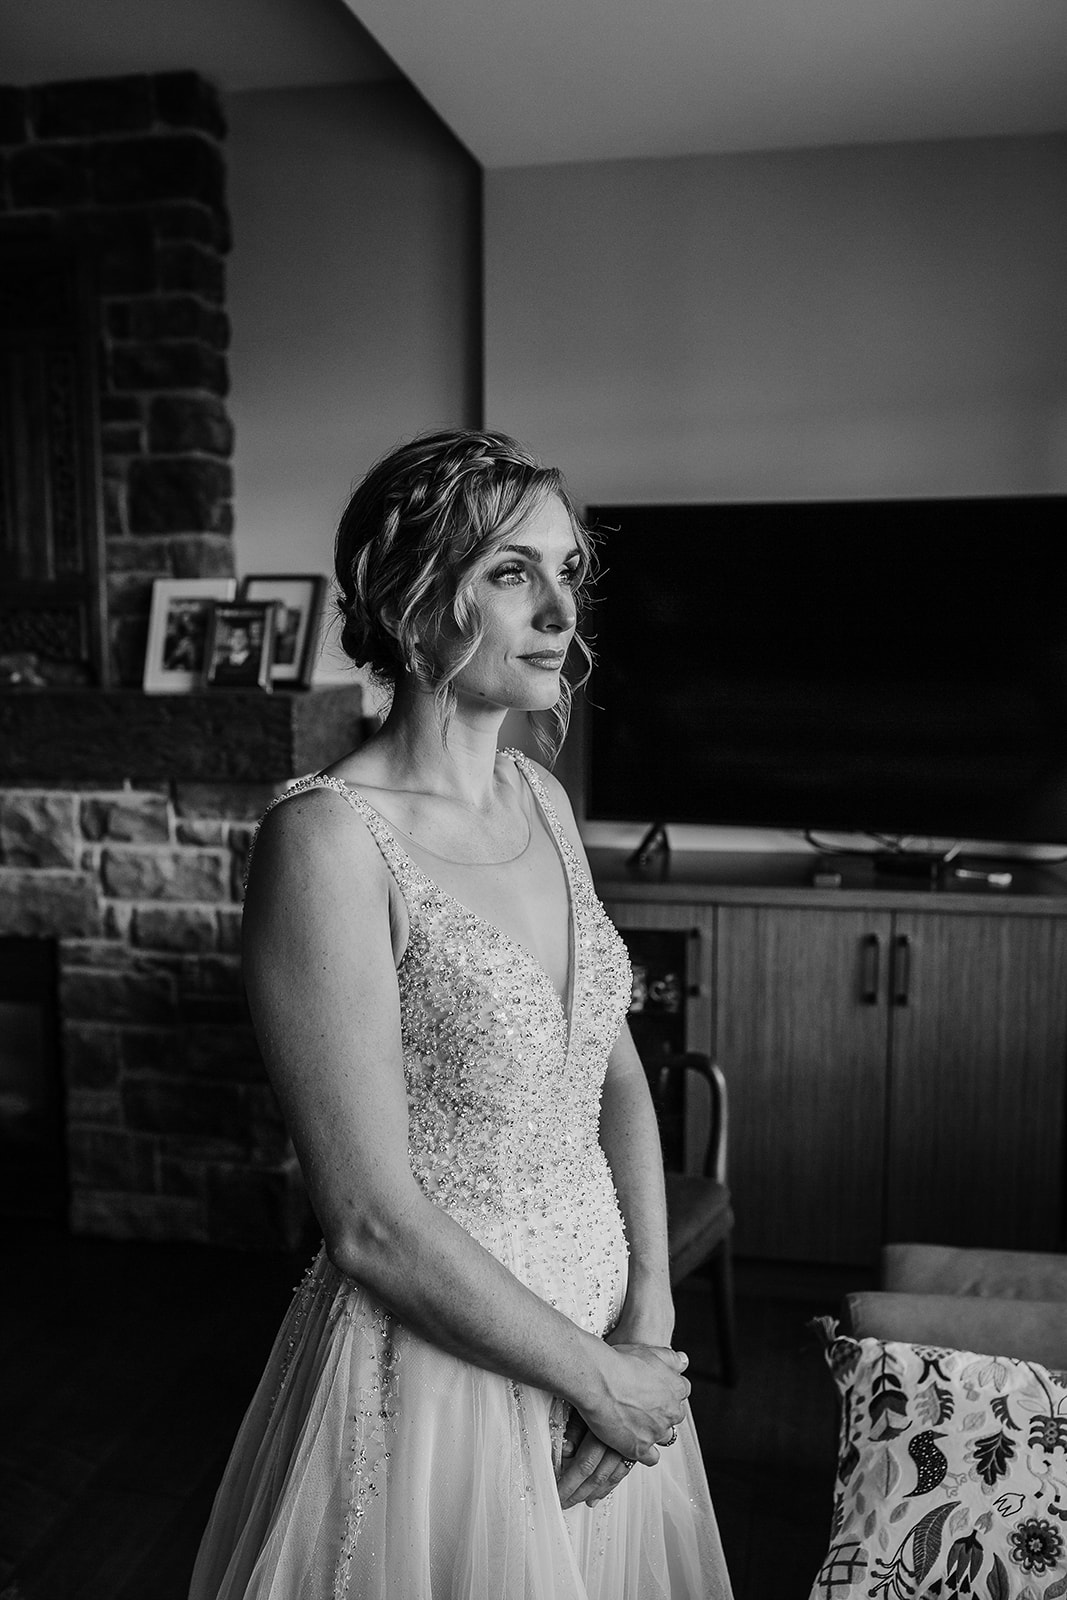 Black and white portrait of a bride on her wedding day in wearing a v-neck beaded bridal dress